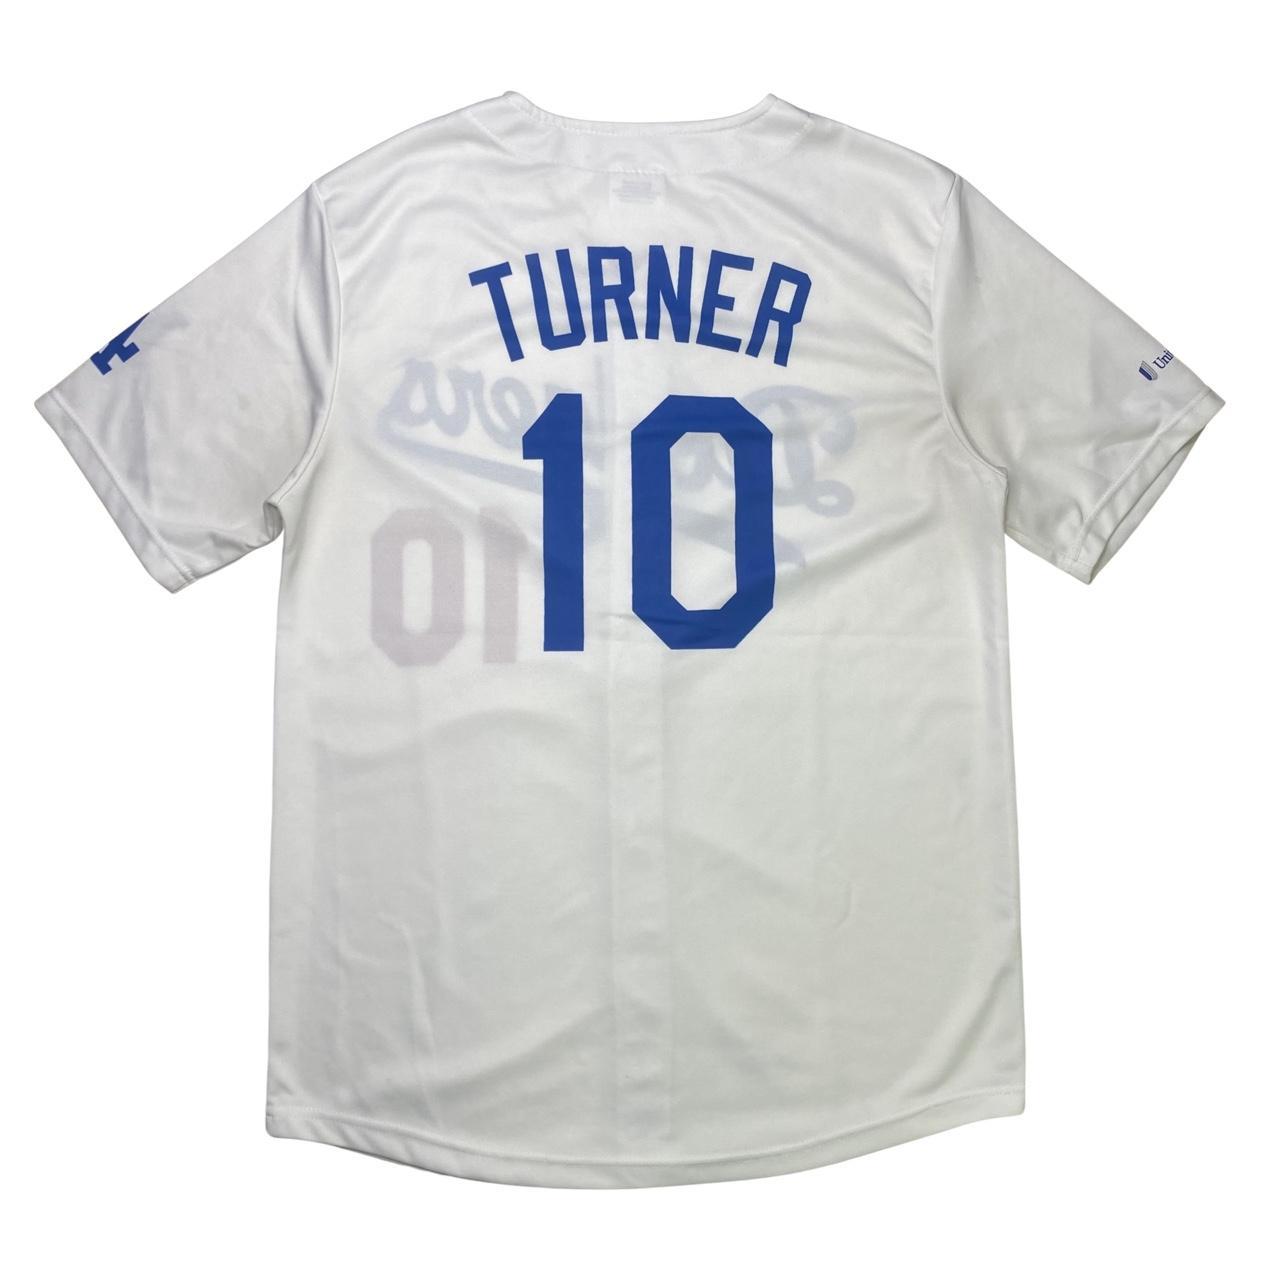 Why is Justin Turner's jersey stained